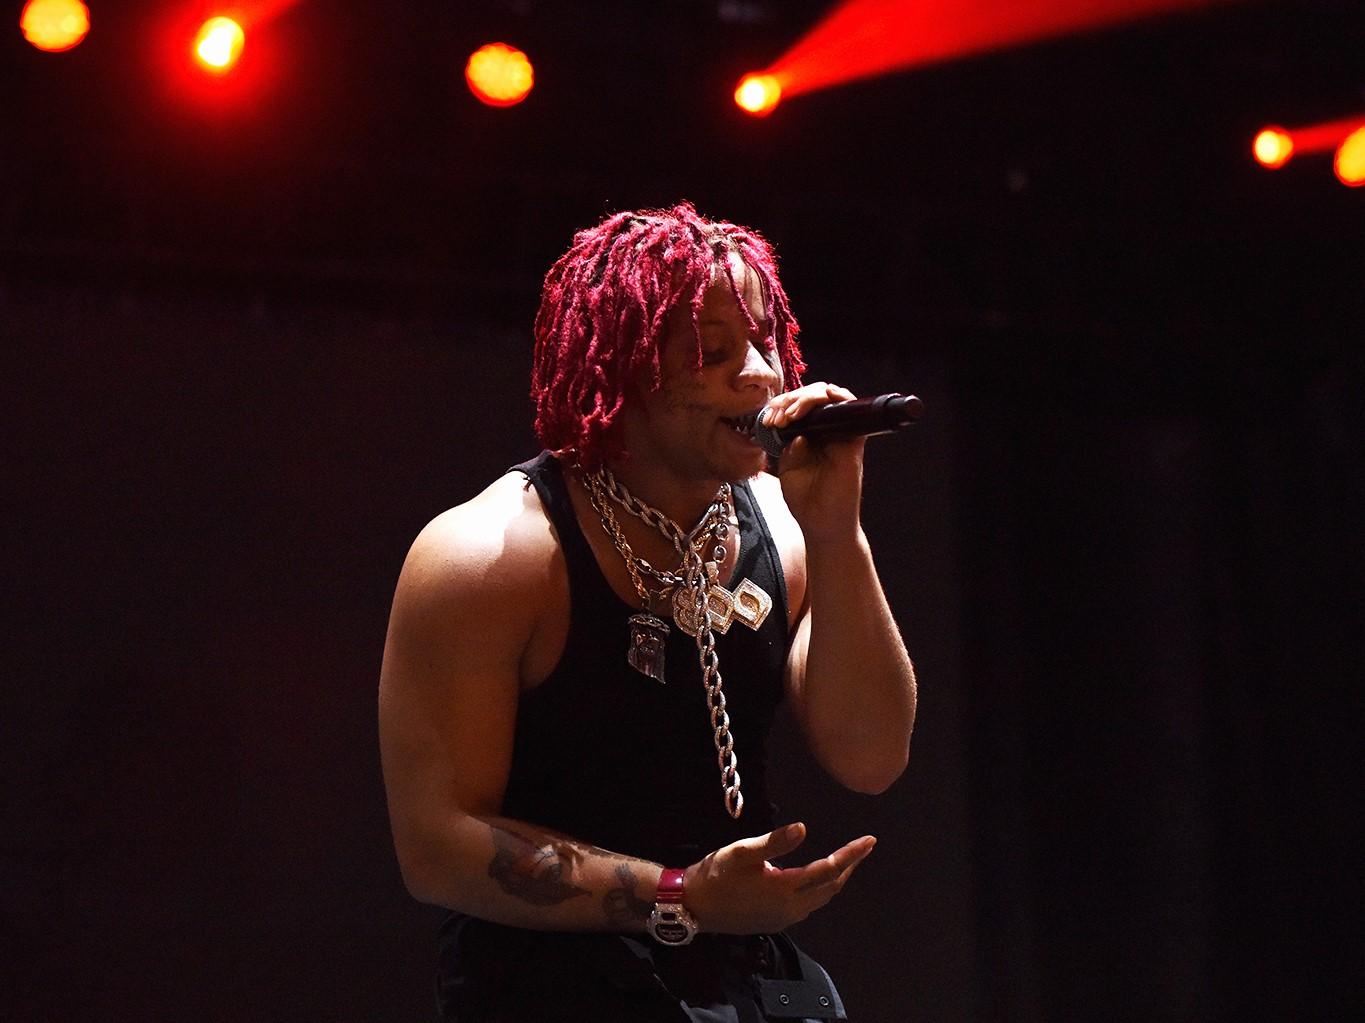 Trippie Redd Animated Wallpapers - Wallpaper Cave